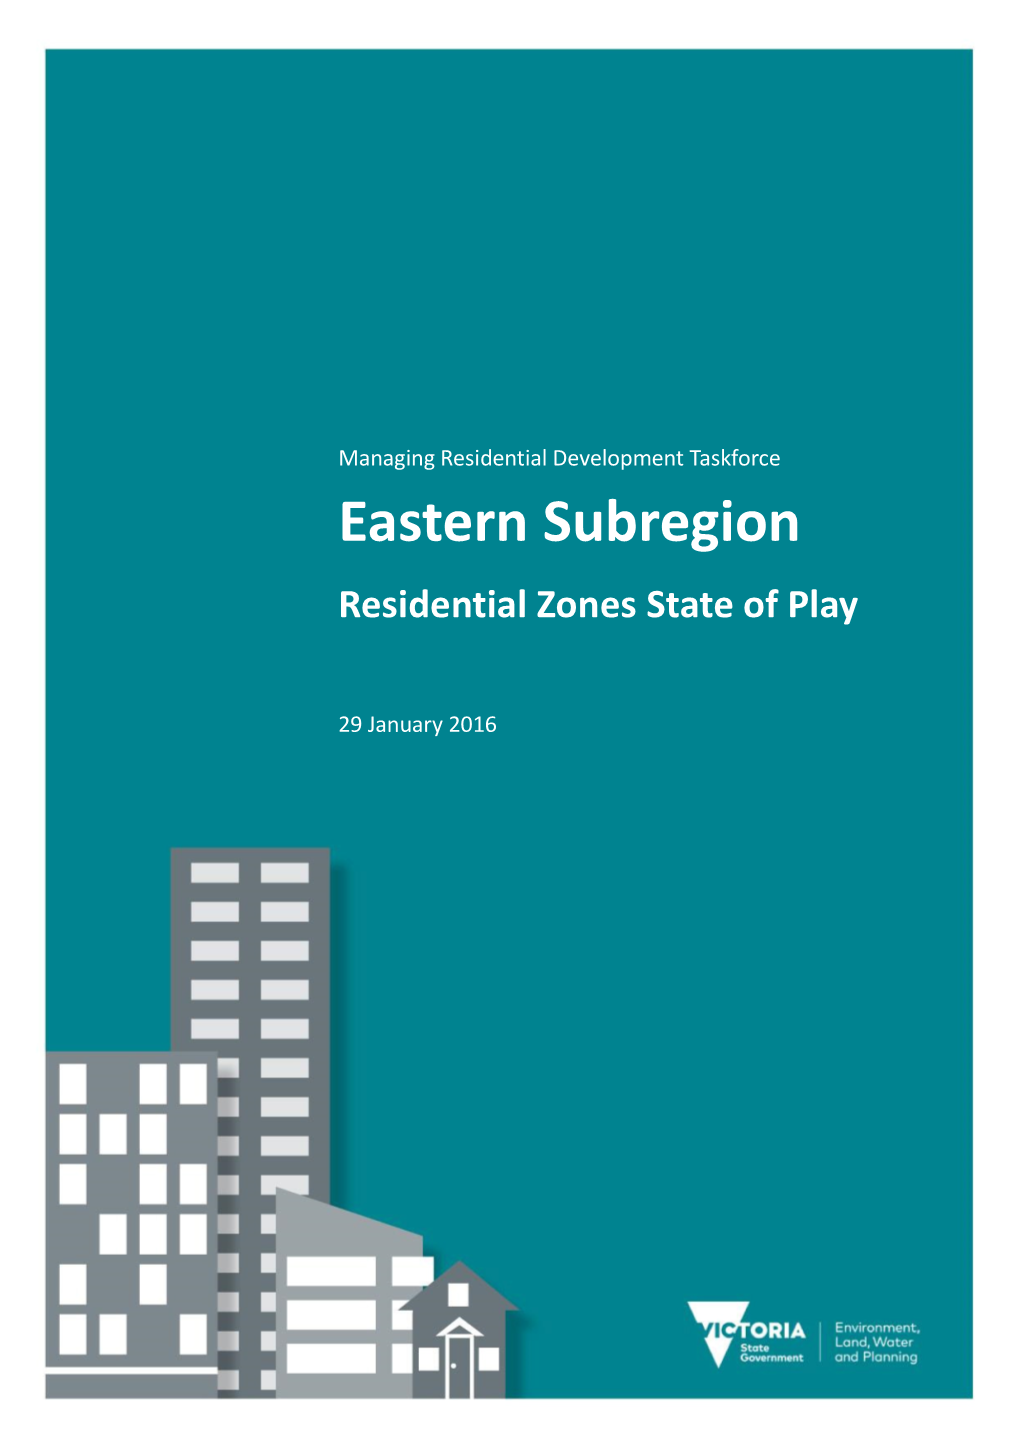 Eastern Subregion Residential Zones State of Play